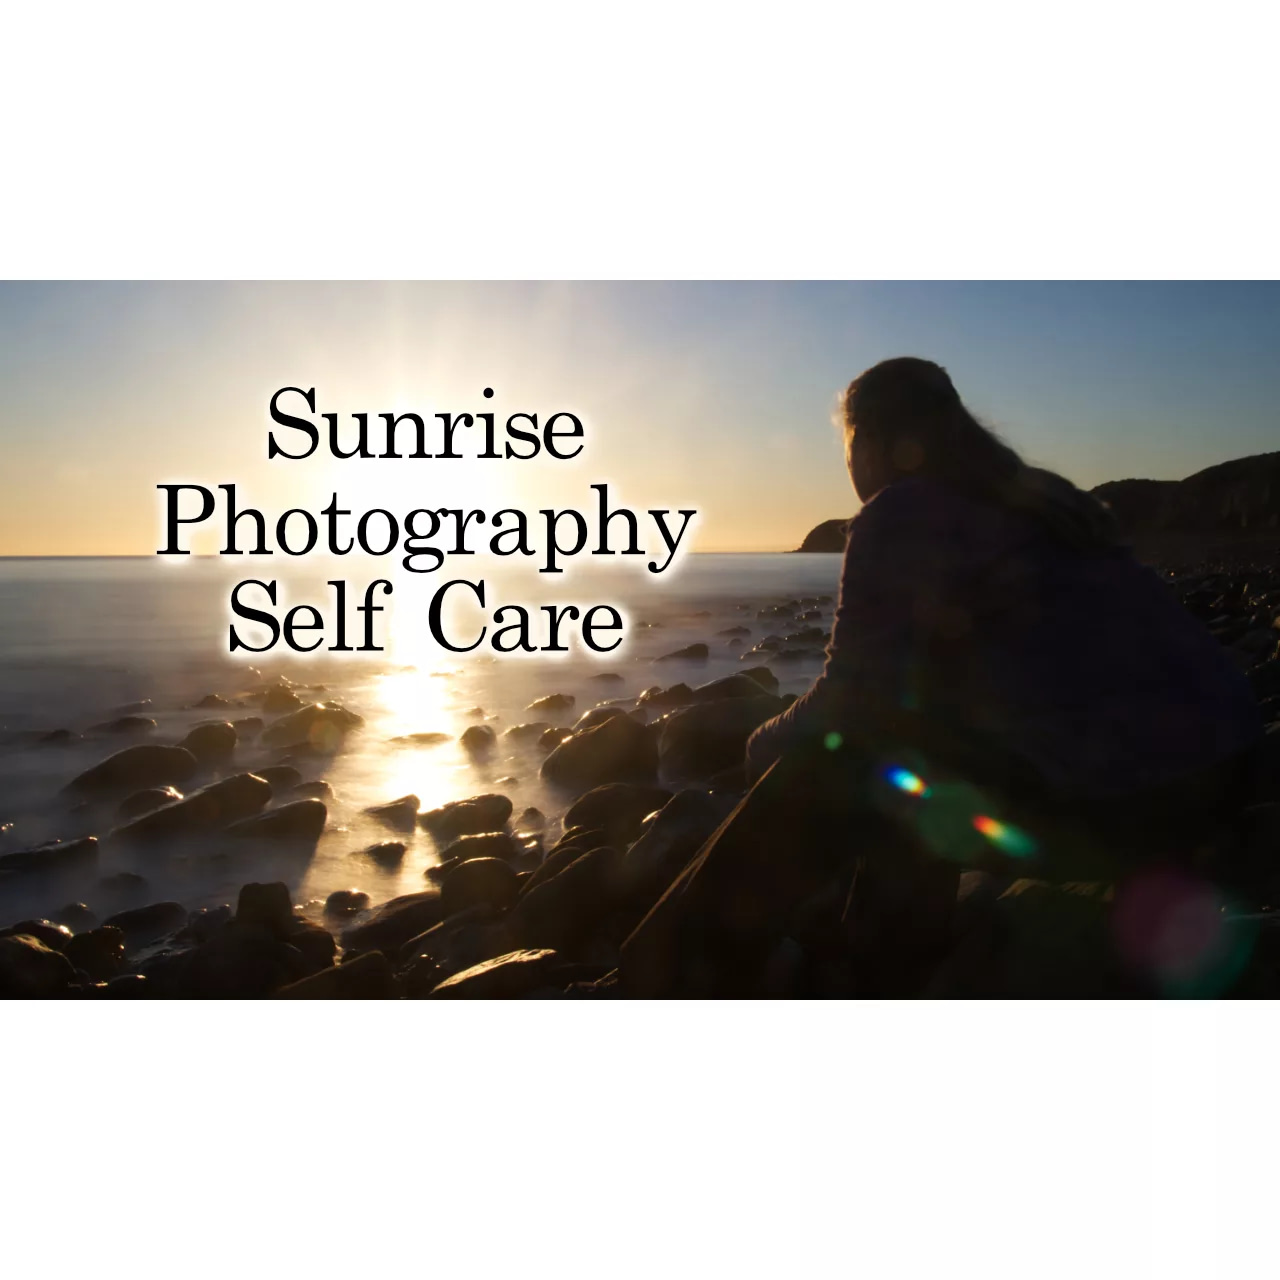 Sunrise Photography and Self Care - Youtube Video by Photographic Alchemi